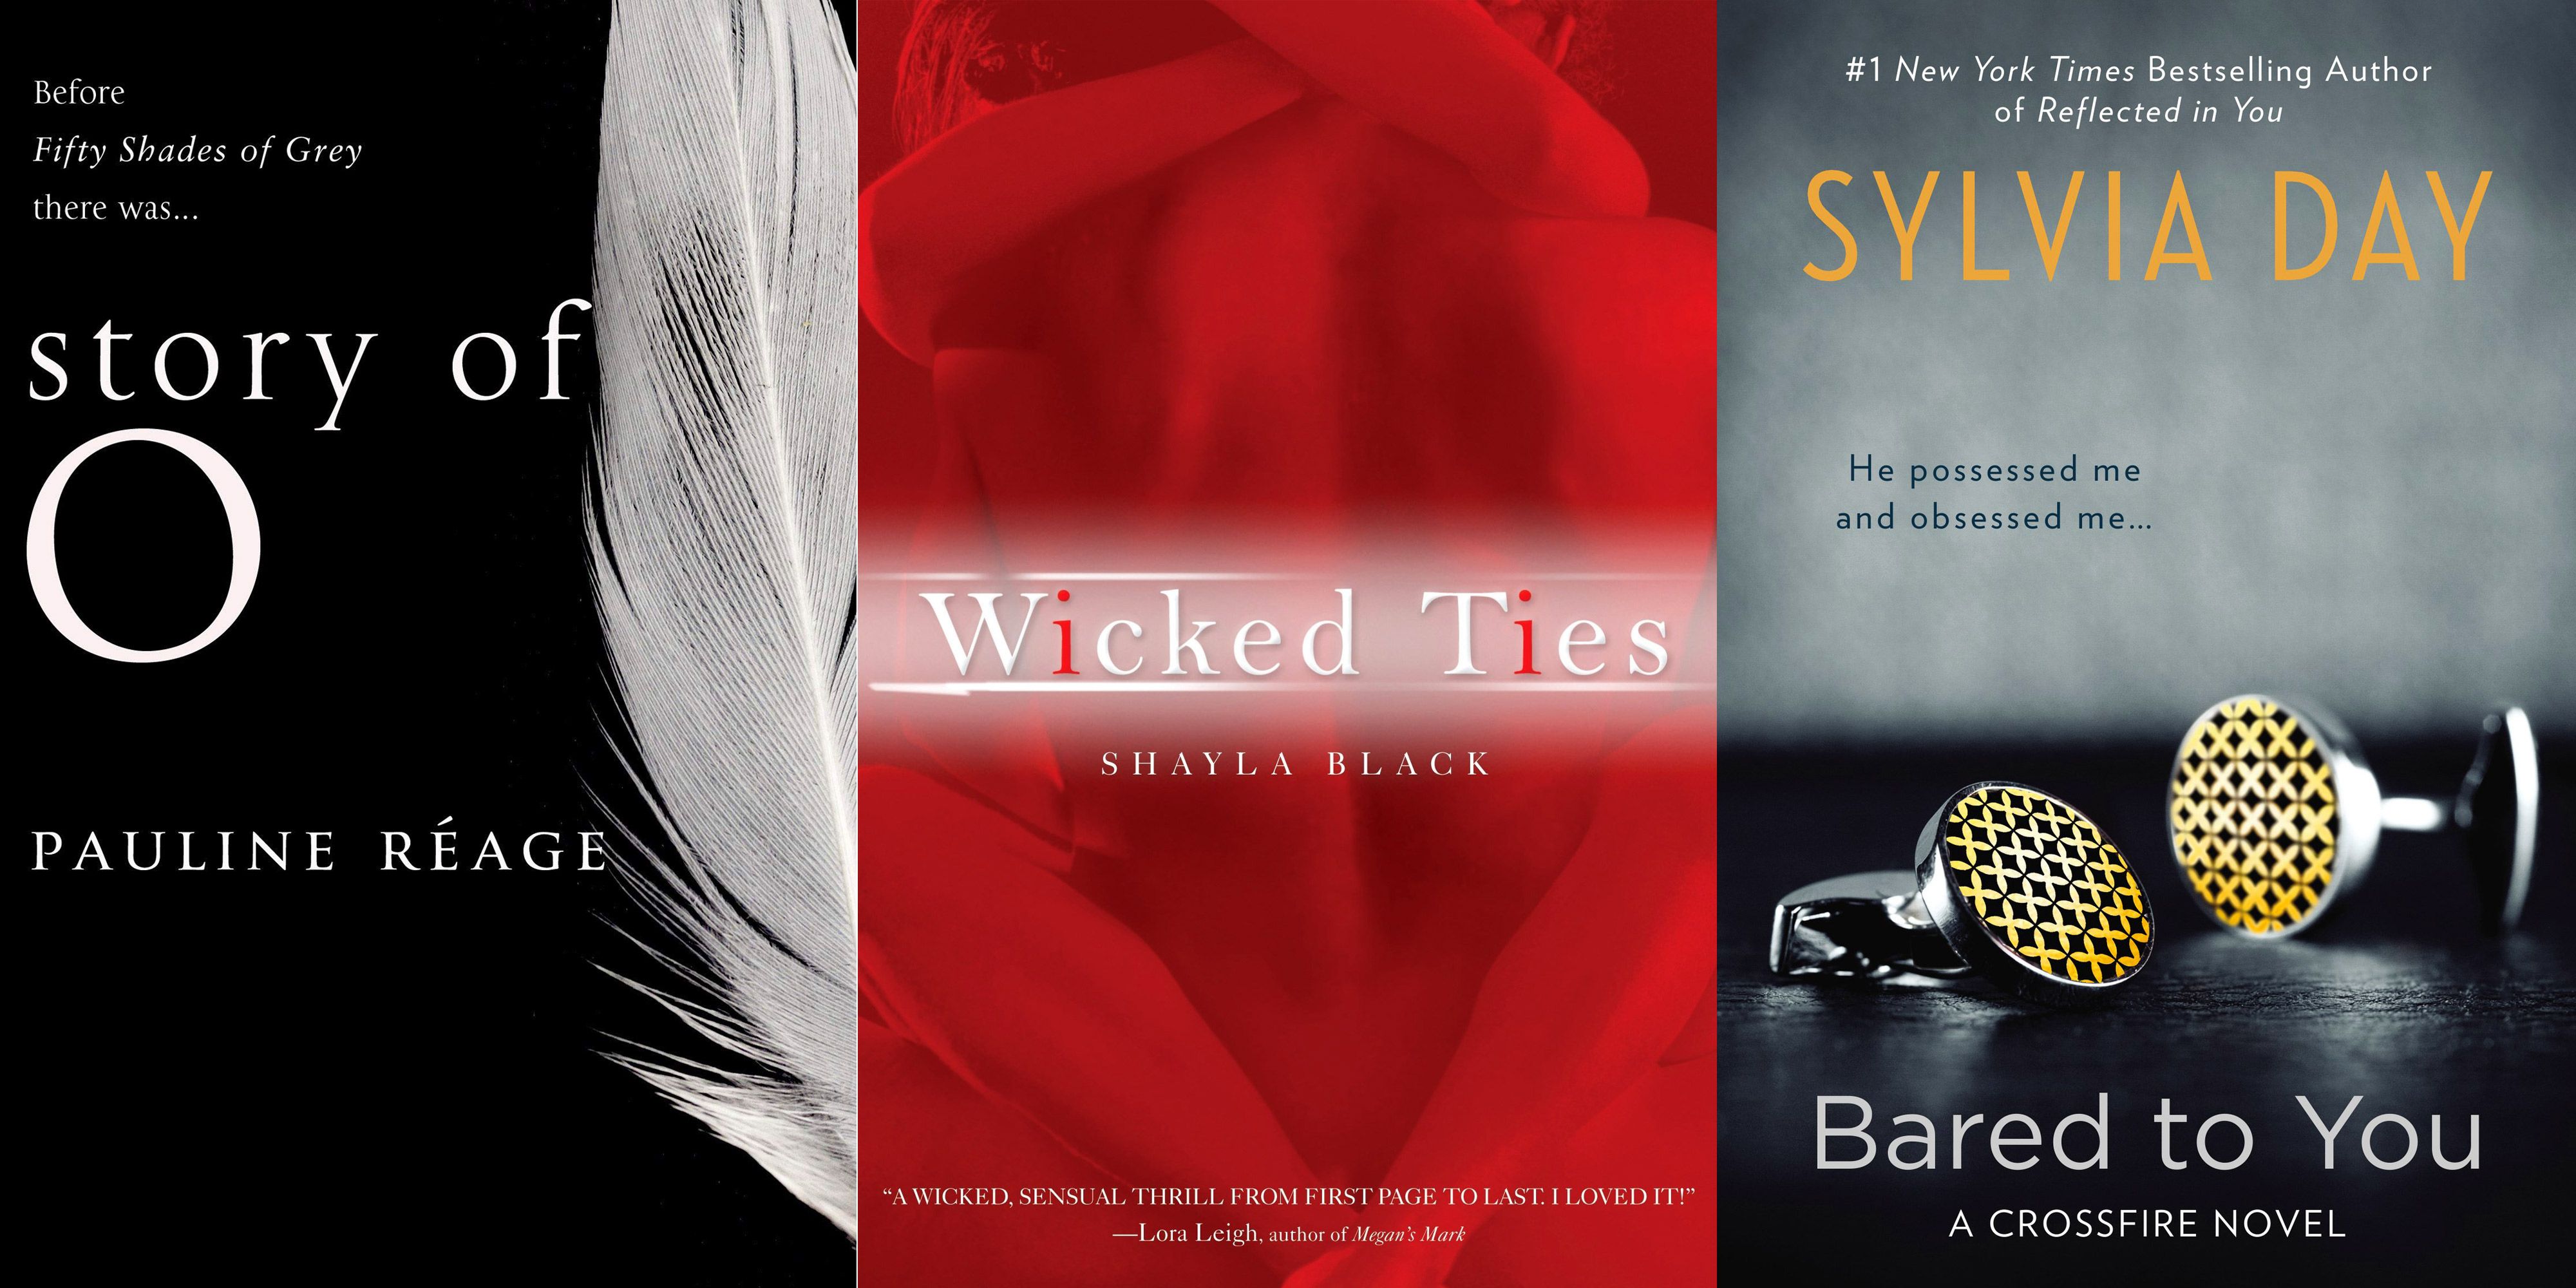 9 Best sm Books For A Steamy Night In